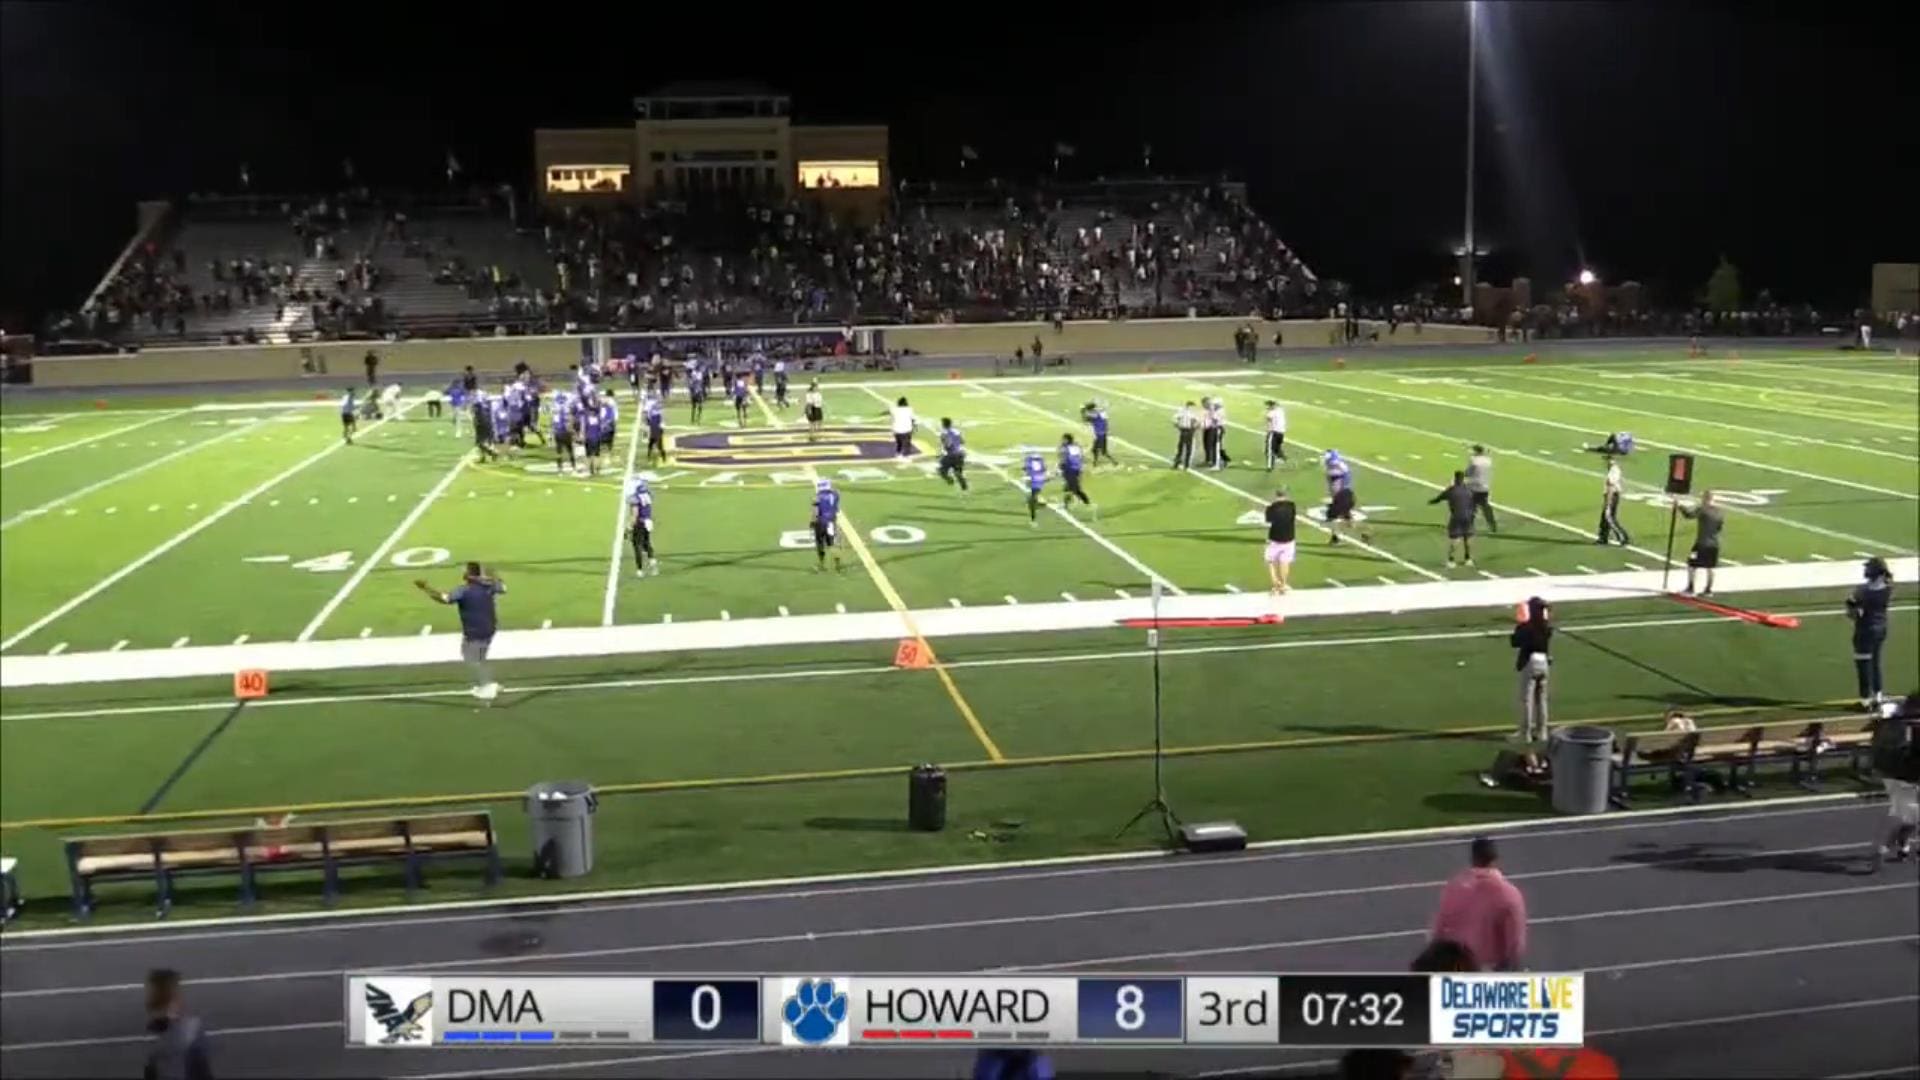 Featured image for “DMA Howard football game suspended in third quarter”